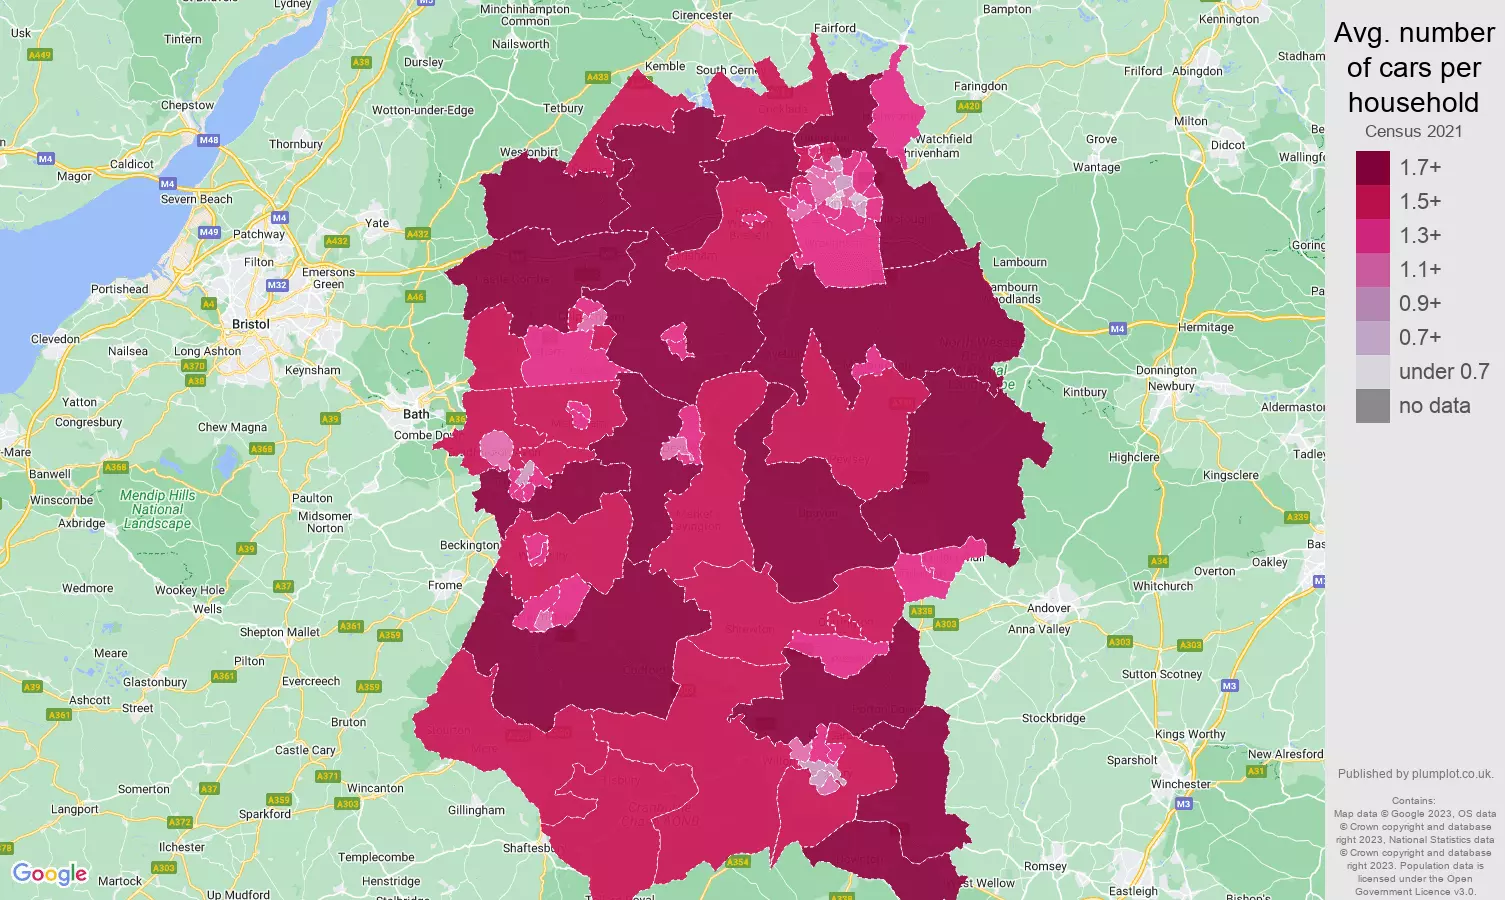 Wiltshire cars per household map